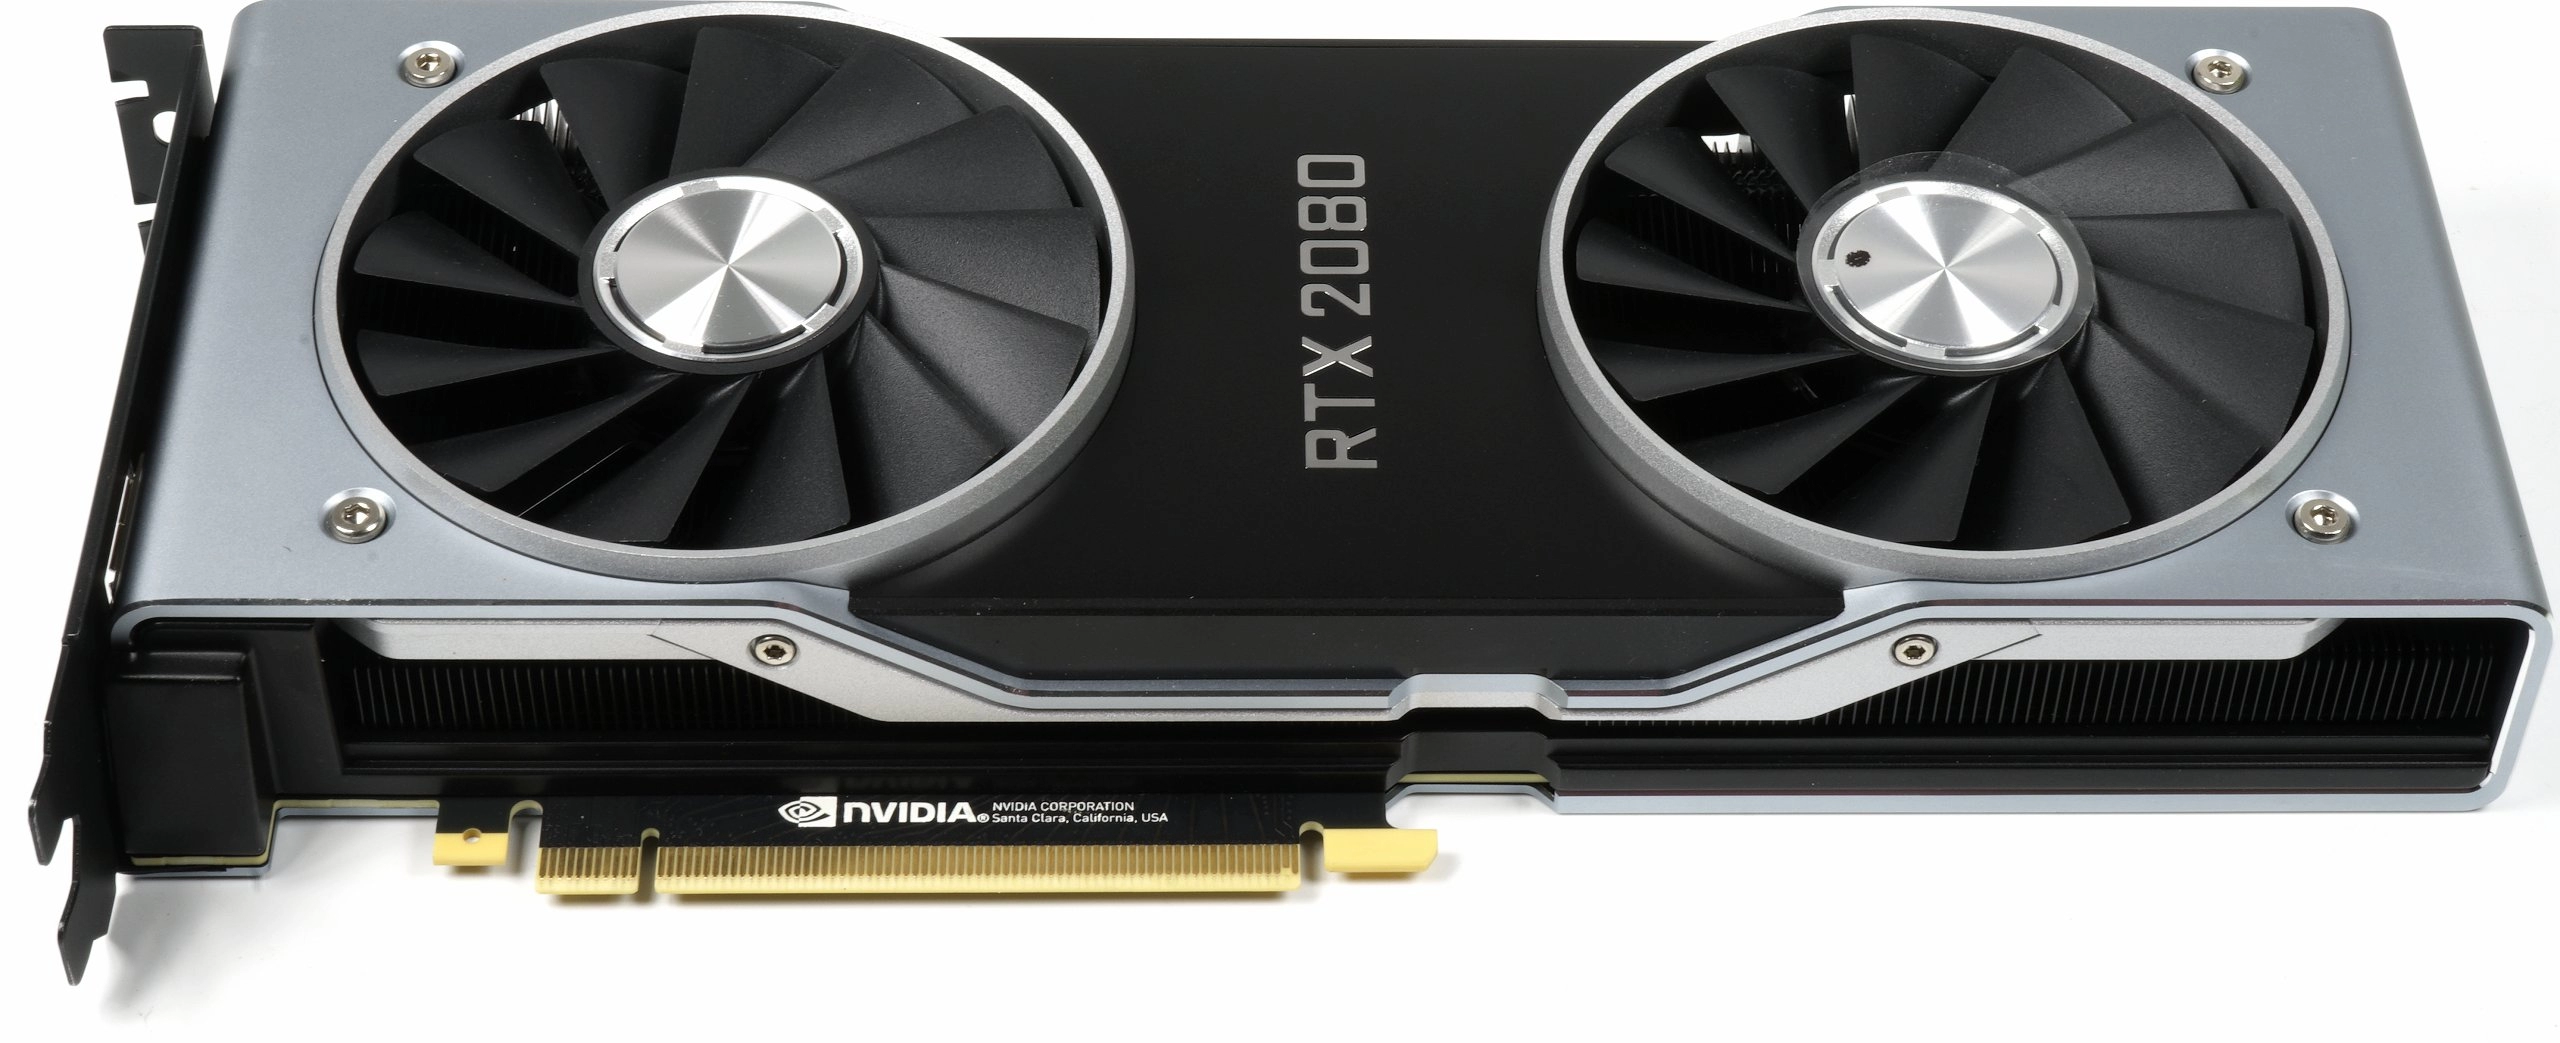 Nvidia GeForce RTX 2080 Ti Founders Edition Behind View